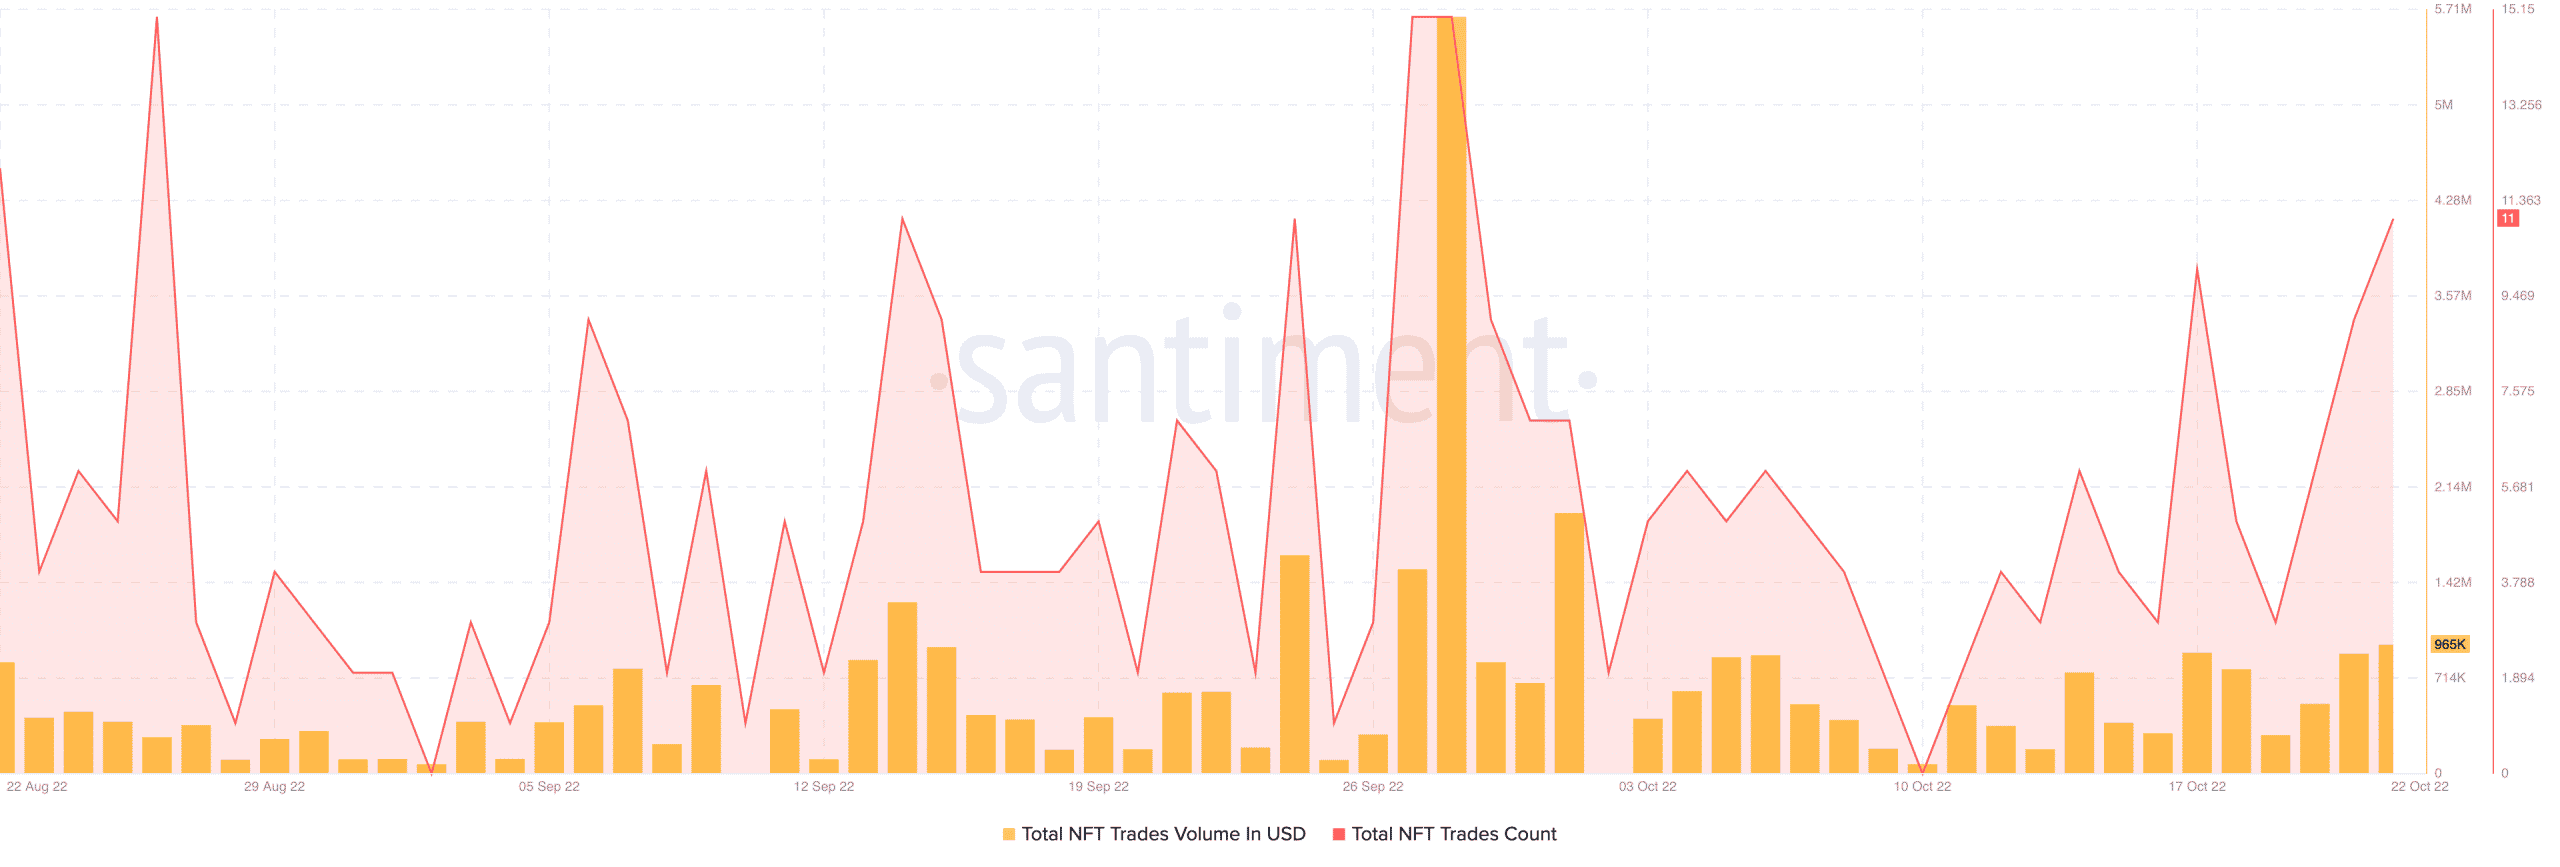 AXS NFT volume chart showing the recent performance